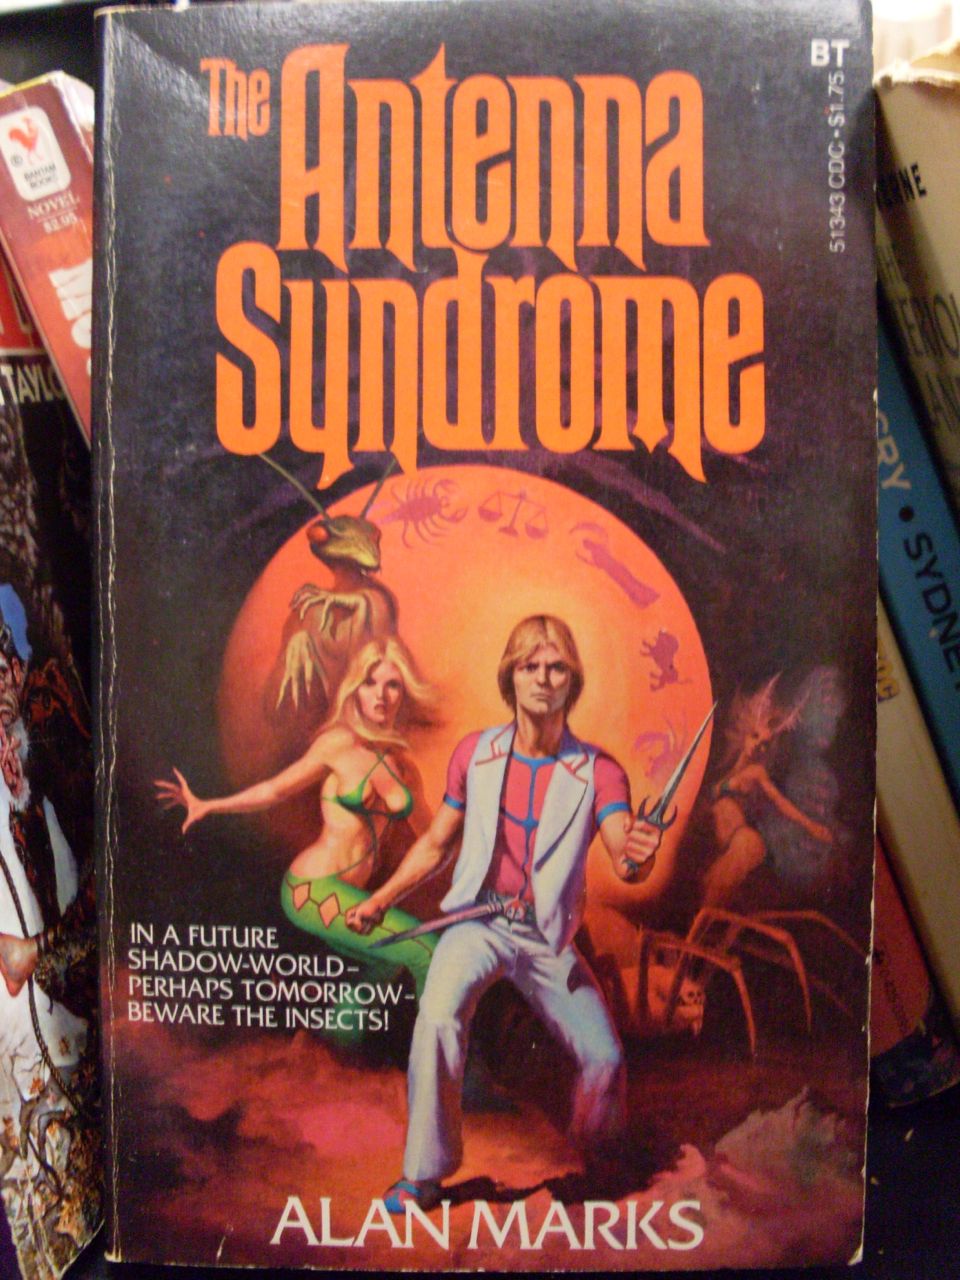 Good Show Sir - Only the worst Sci-fi/Fantasy book covers